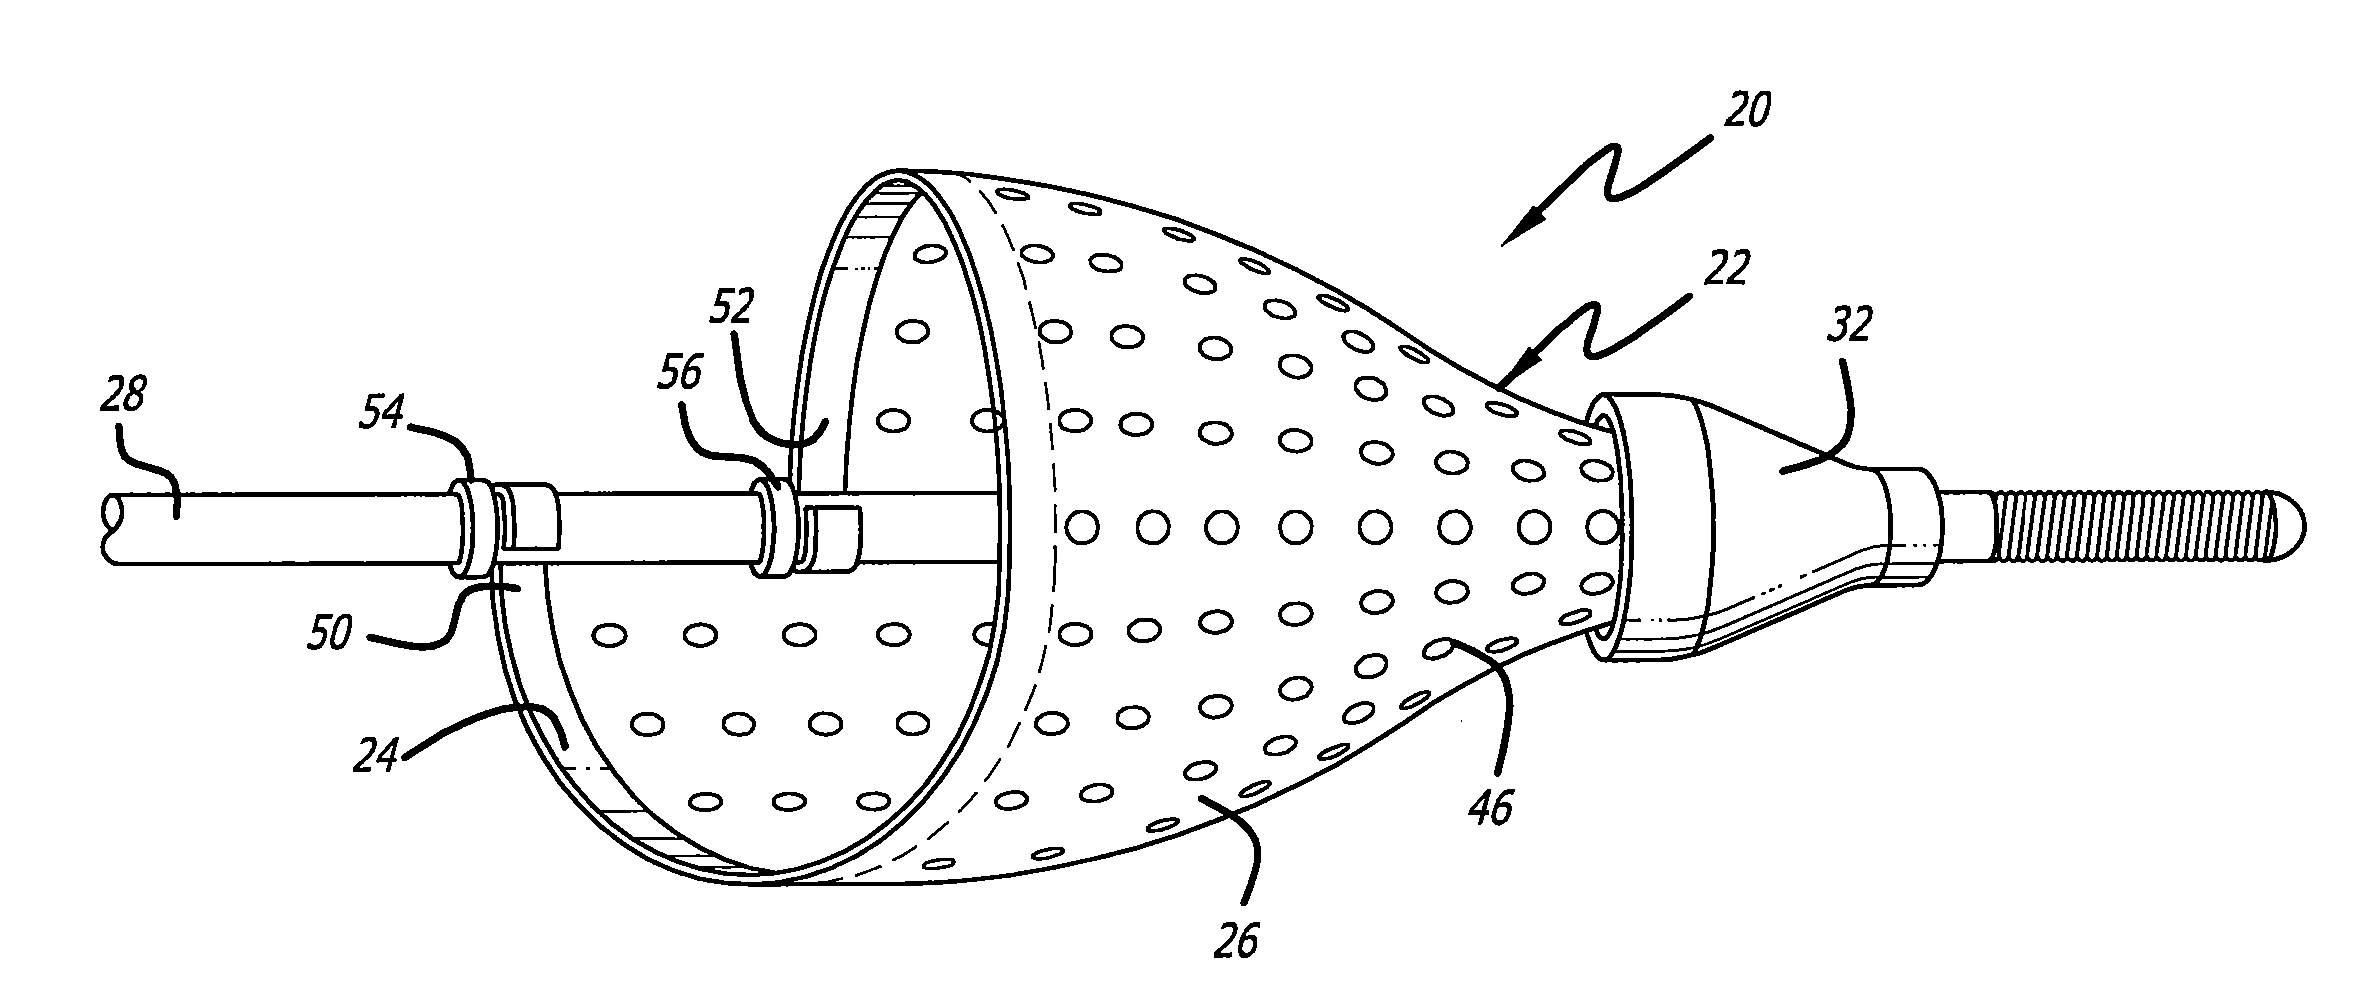 Single-wire expandable cages for embolic filtering devices